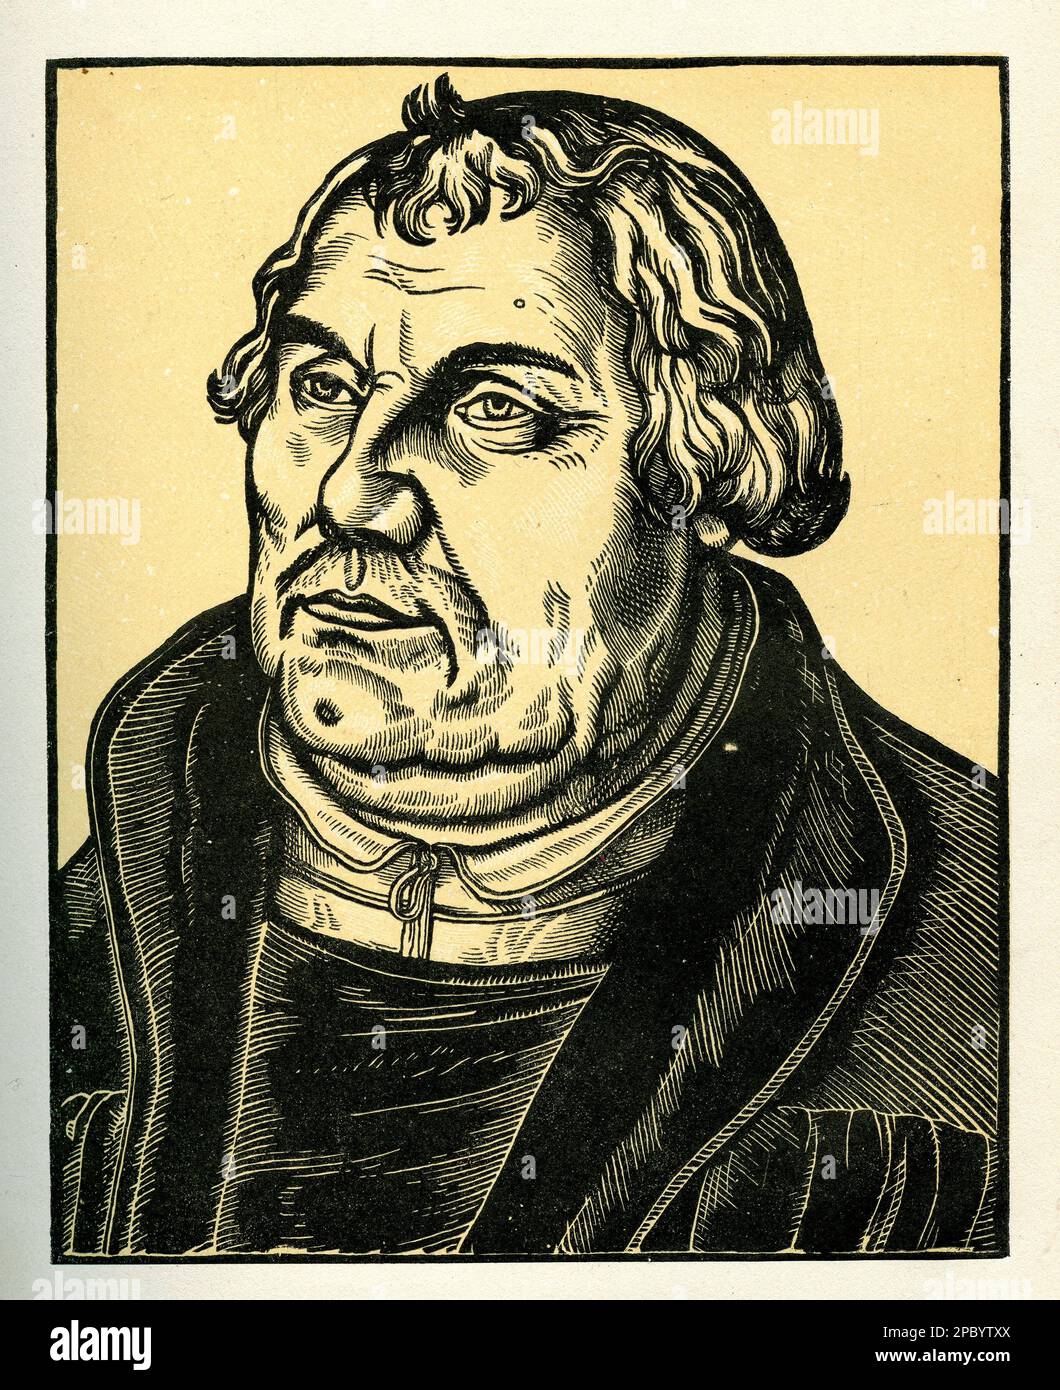 Lucas Cranach's portrait of Martin Luther depicts the religious leader with a stern expression and a determined gaze. Luther wears a monk's robe. The painting captures the essence of the Protestant Reformation and Luther's pivotal role in it. Stock Photo